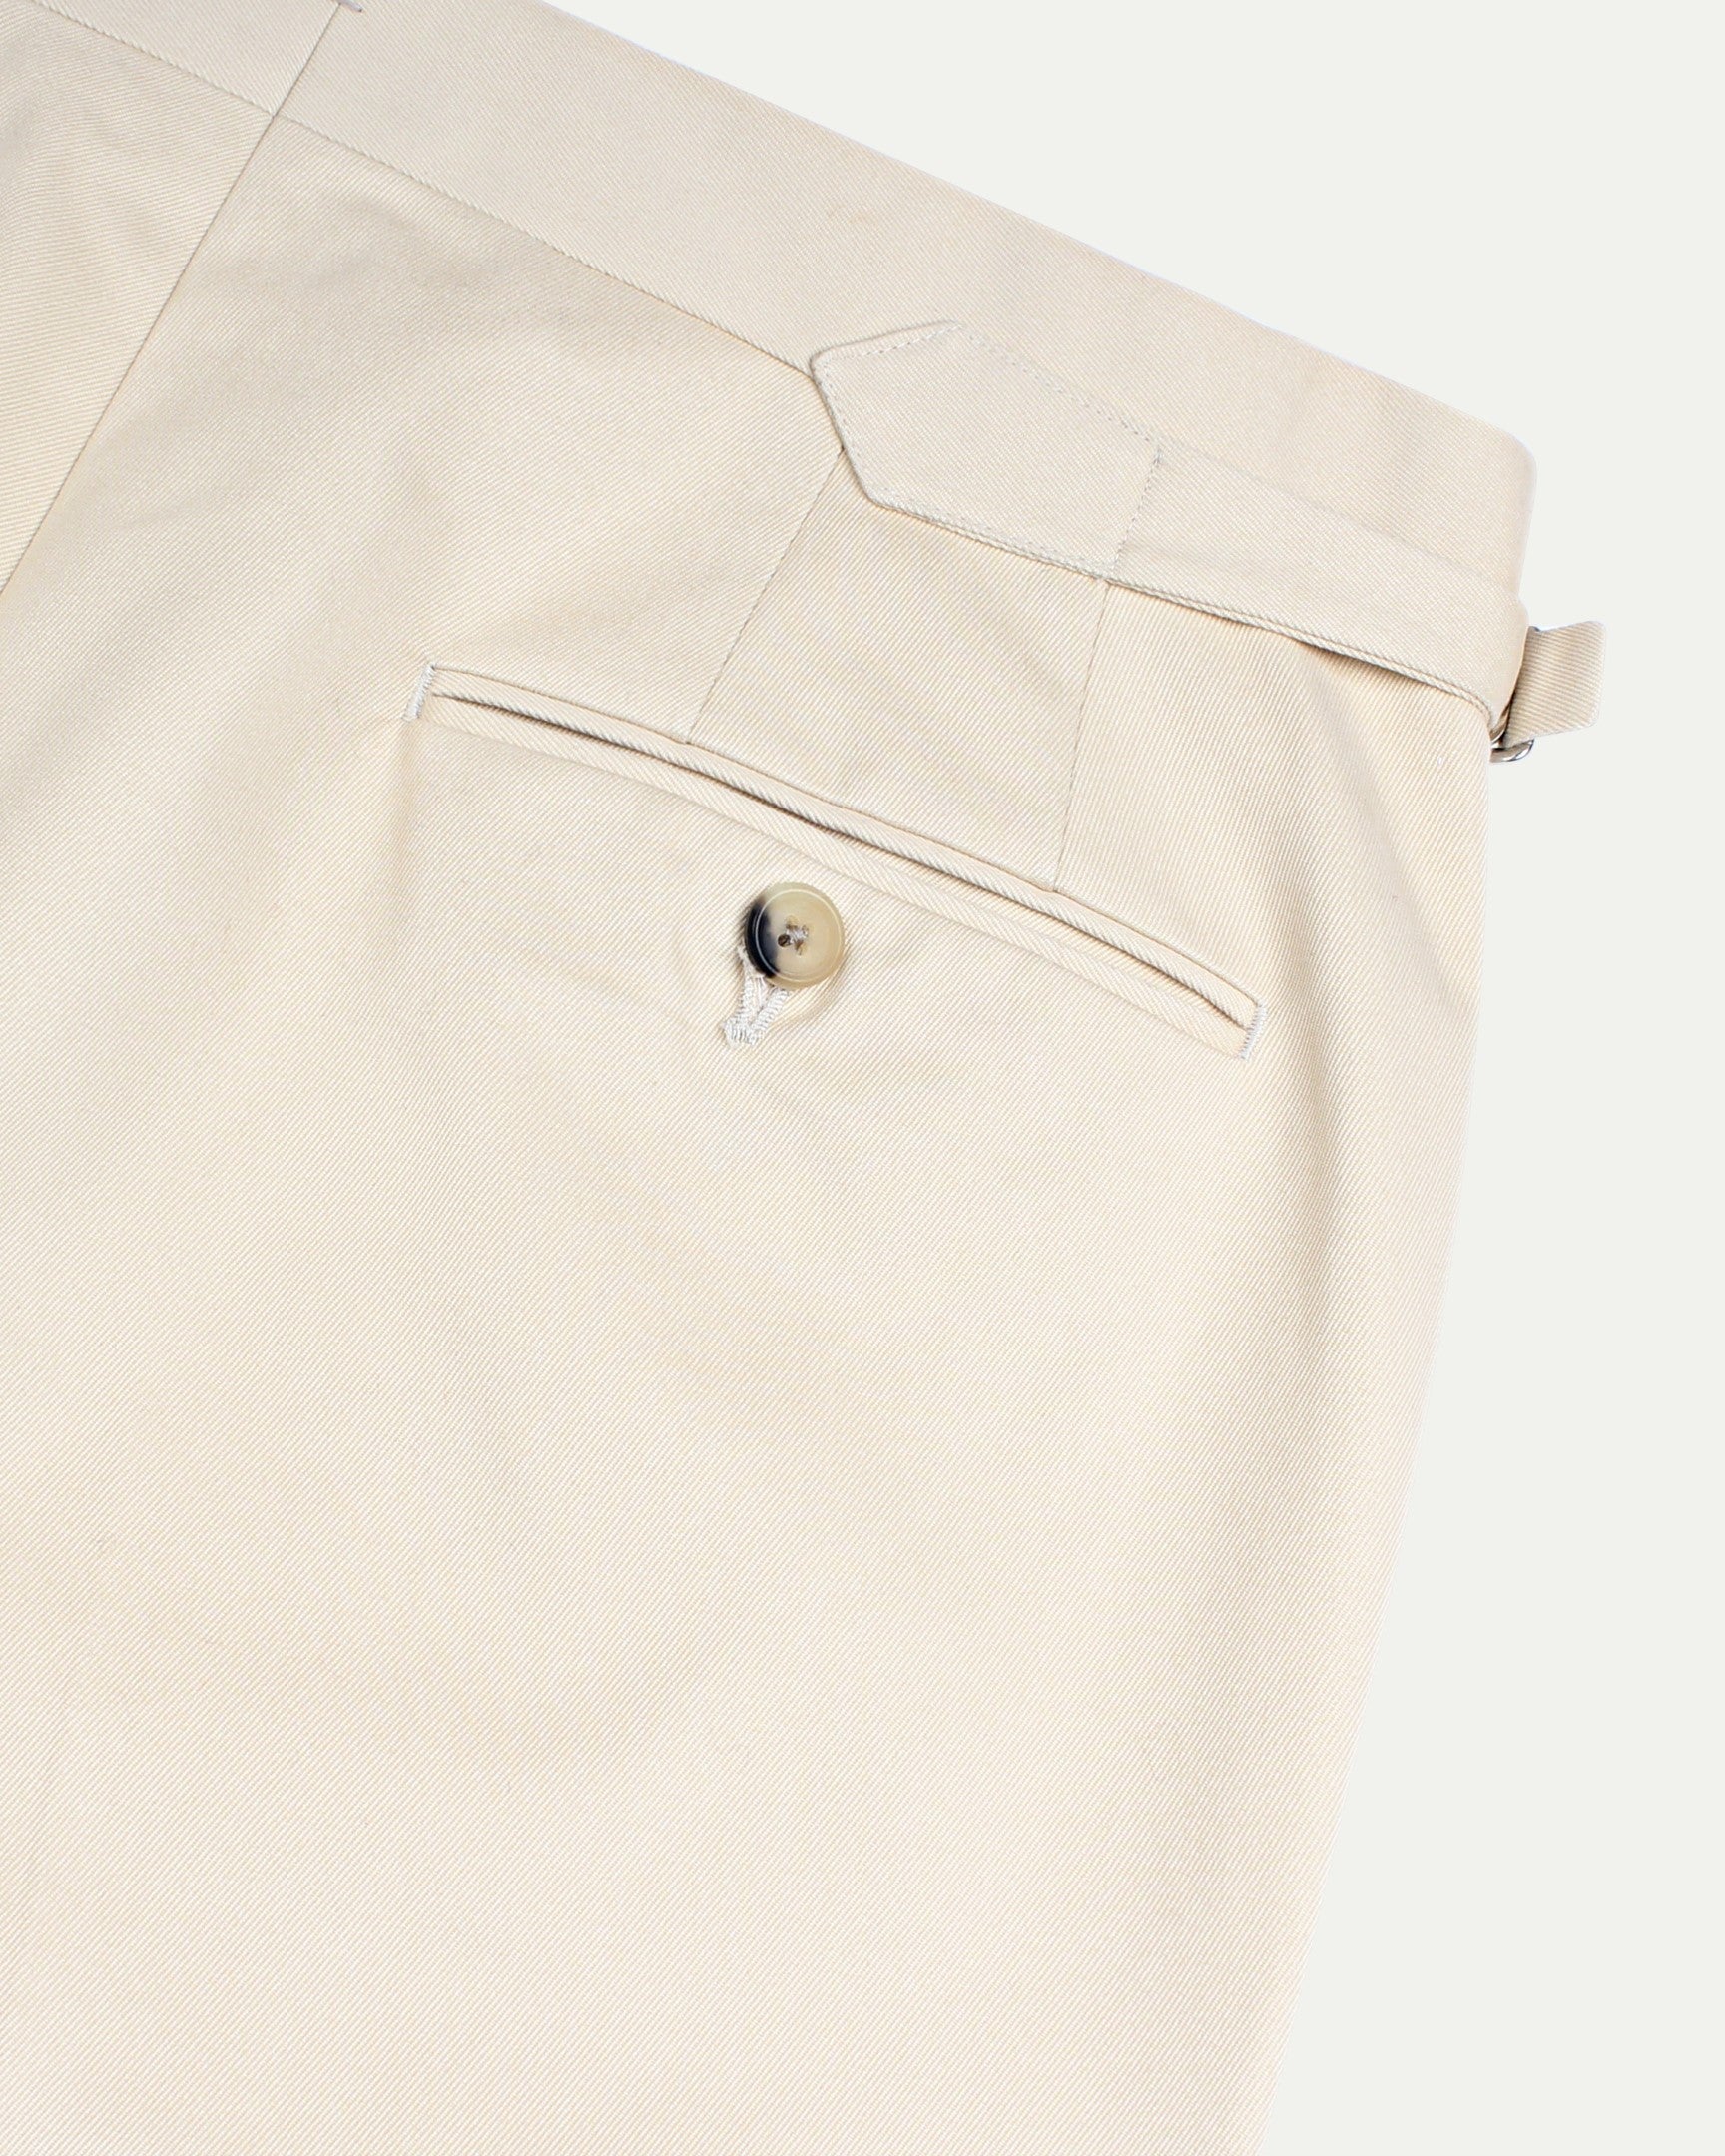 Made-To-Order Trousers in Cream Cotton Drill